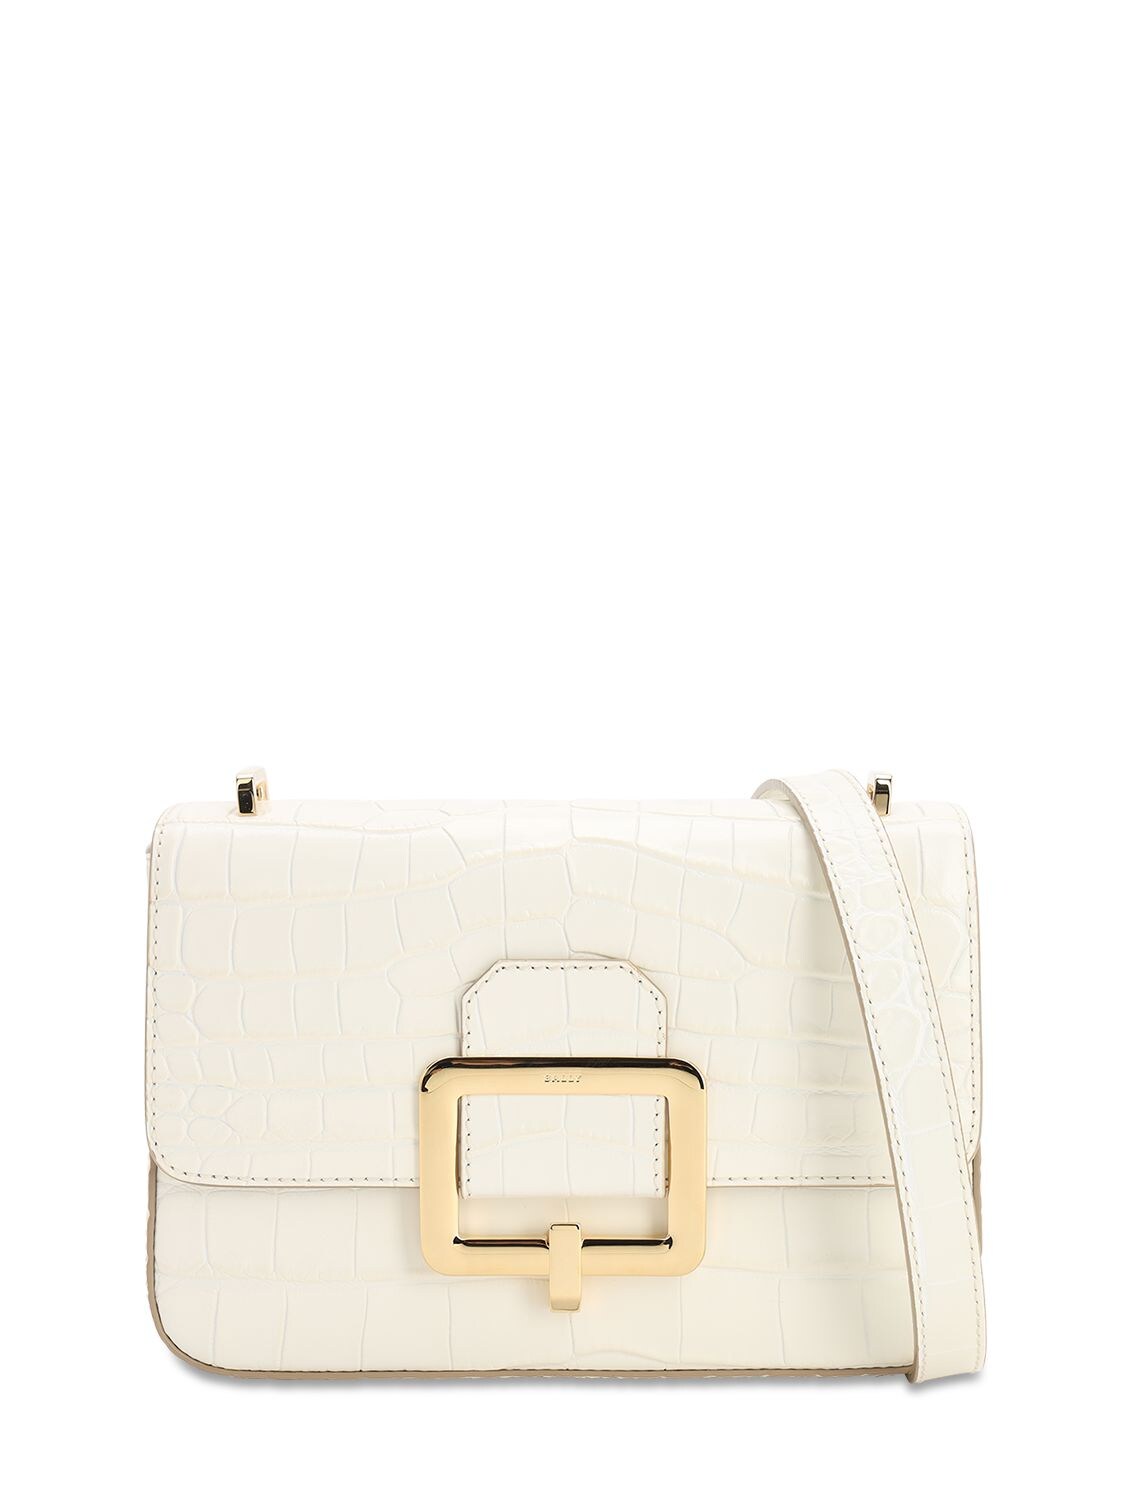 Bally Janelle Croc Embossed Leather Bag In Bone